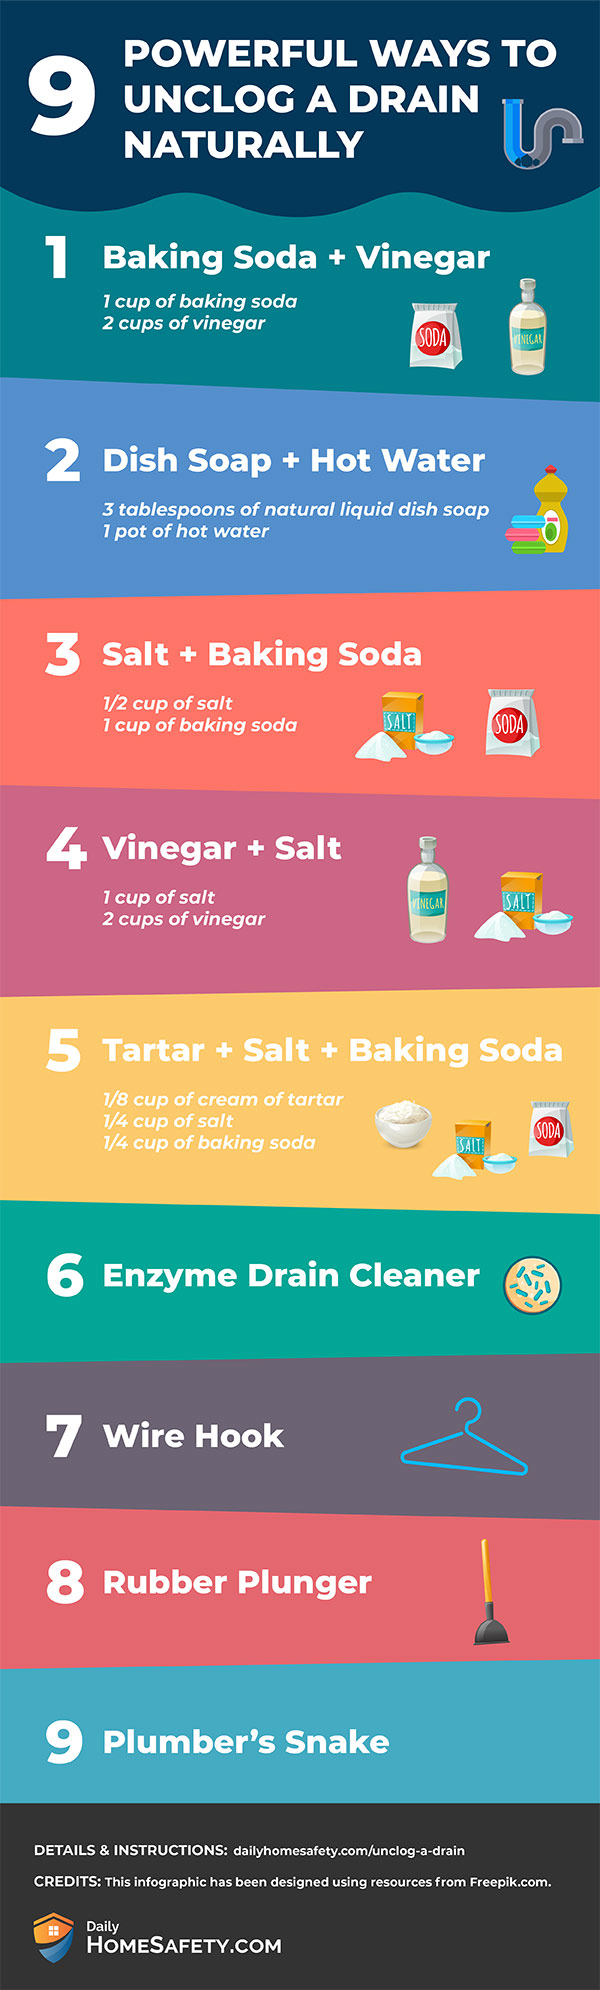 A colorful infographic about the summary of the best ways on how to unclog a drain naturally